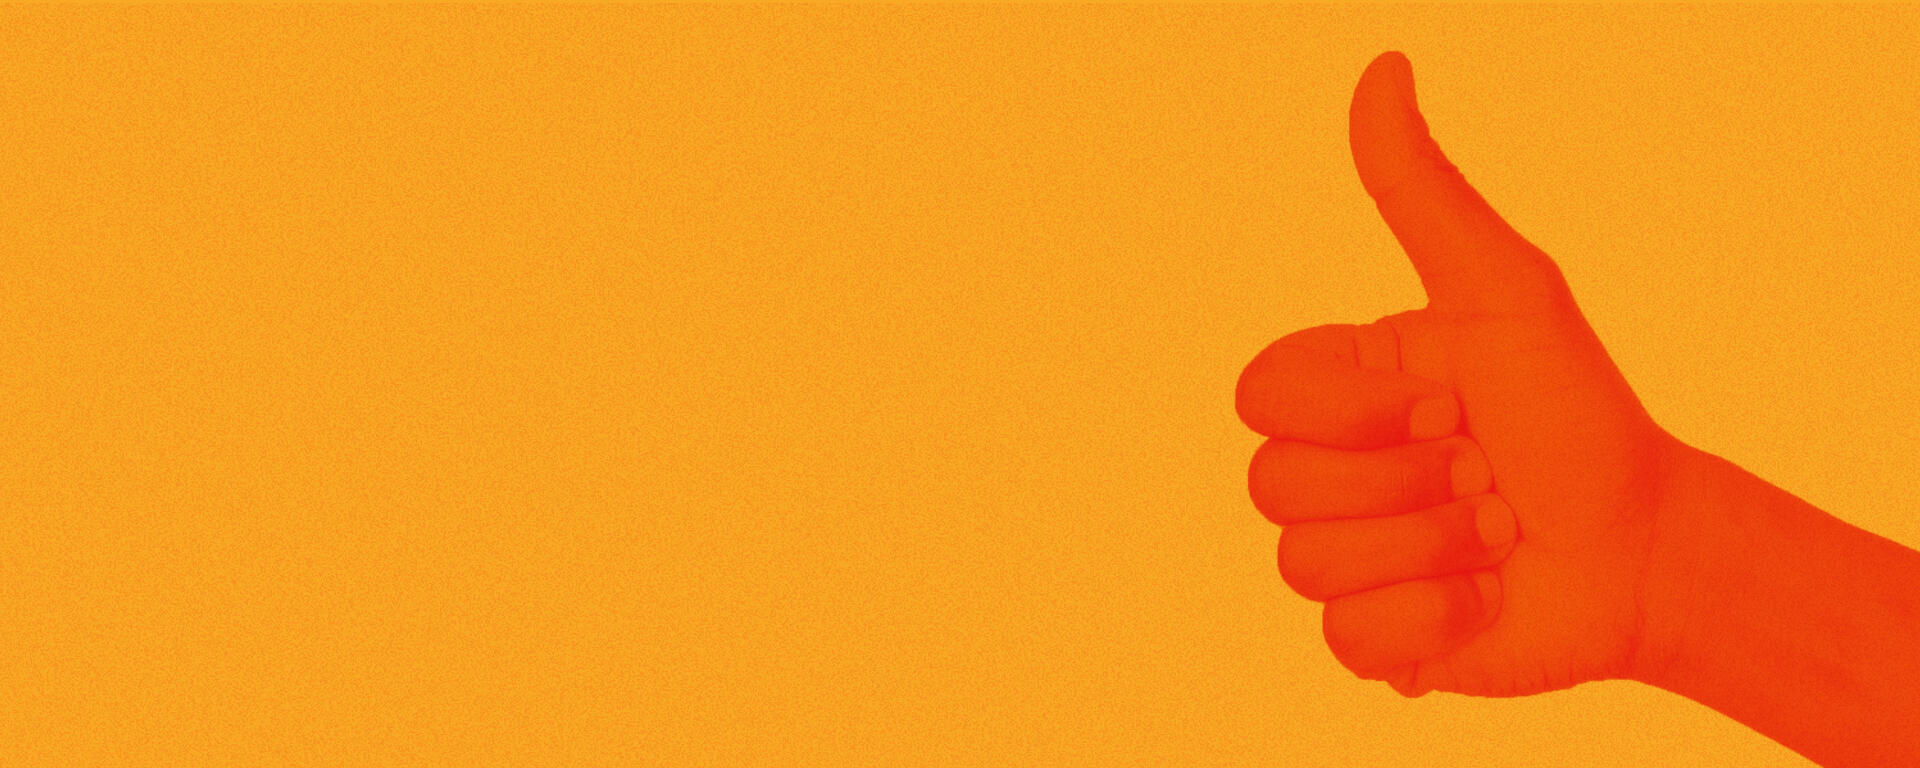 A red thumbs up against an orange background.